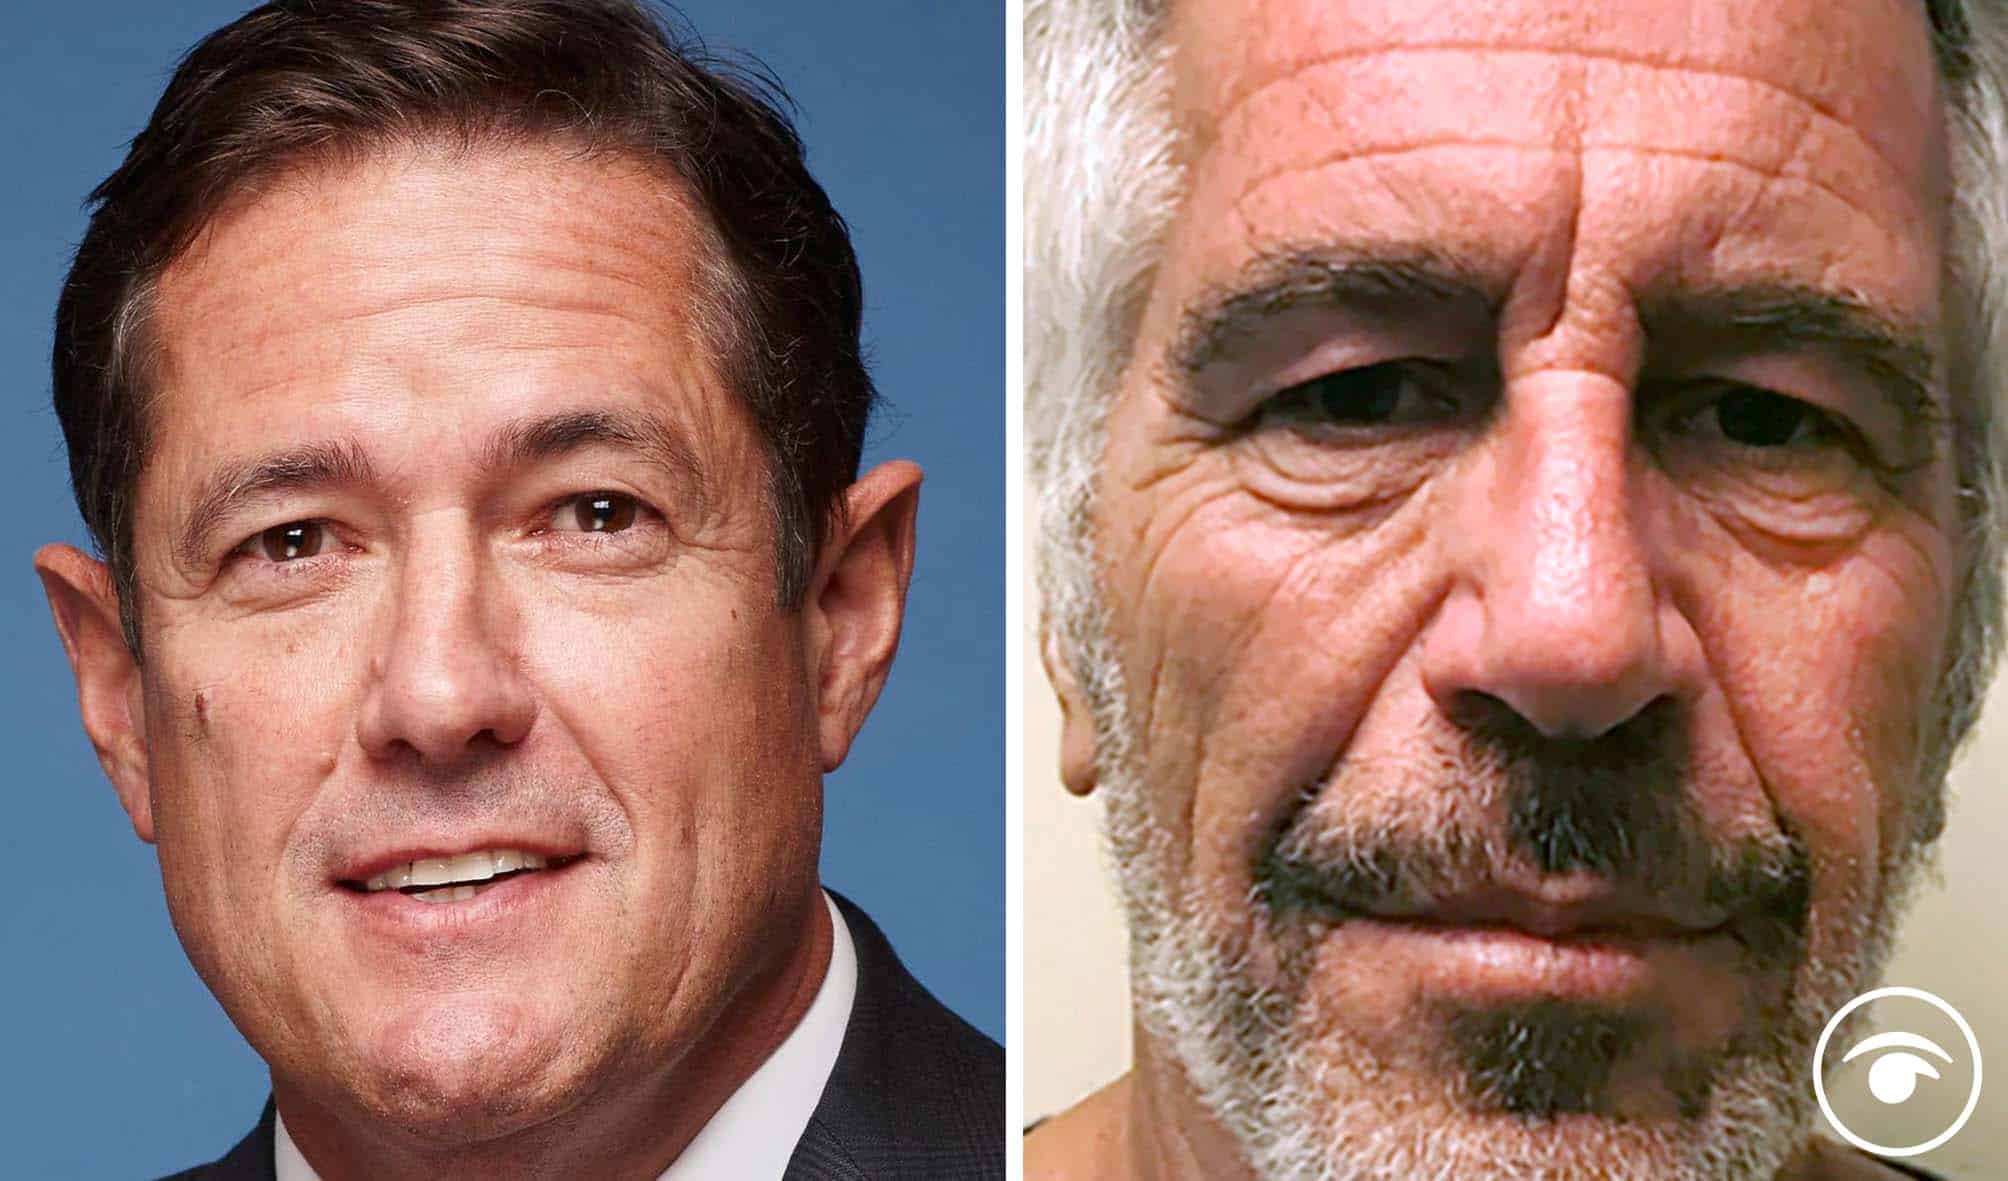 Barclays boss quits over playing down Epstein relationship…but still gets huge payoff